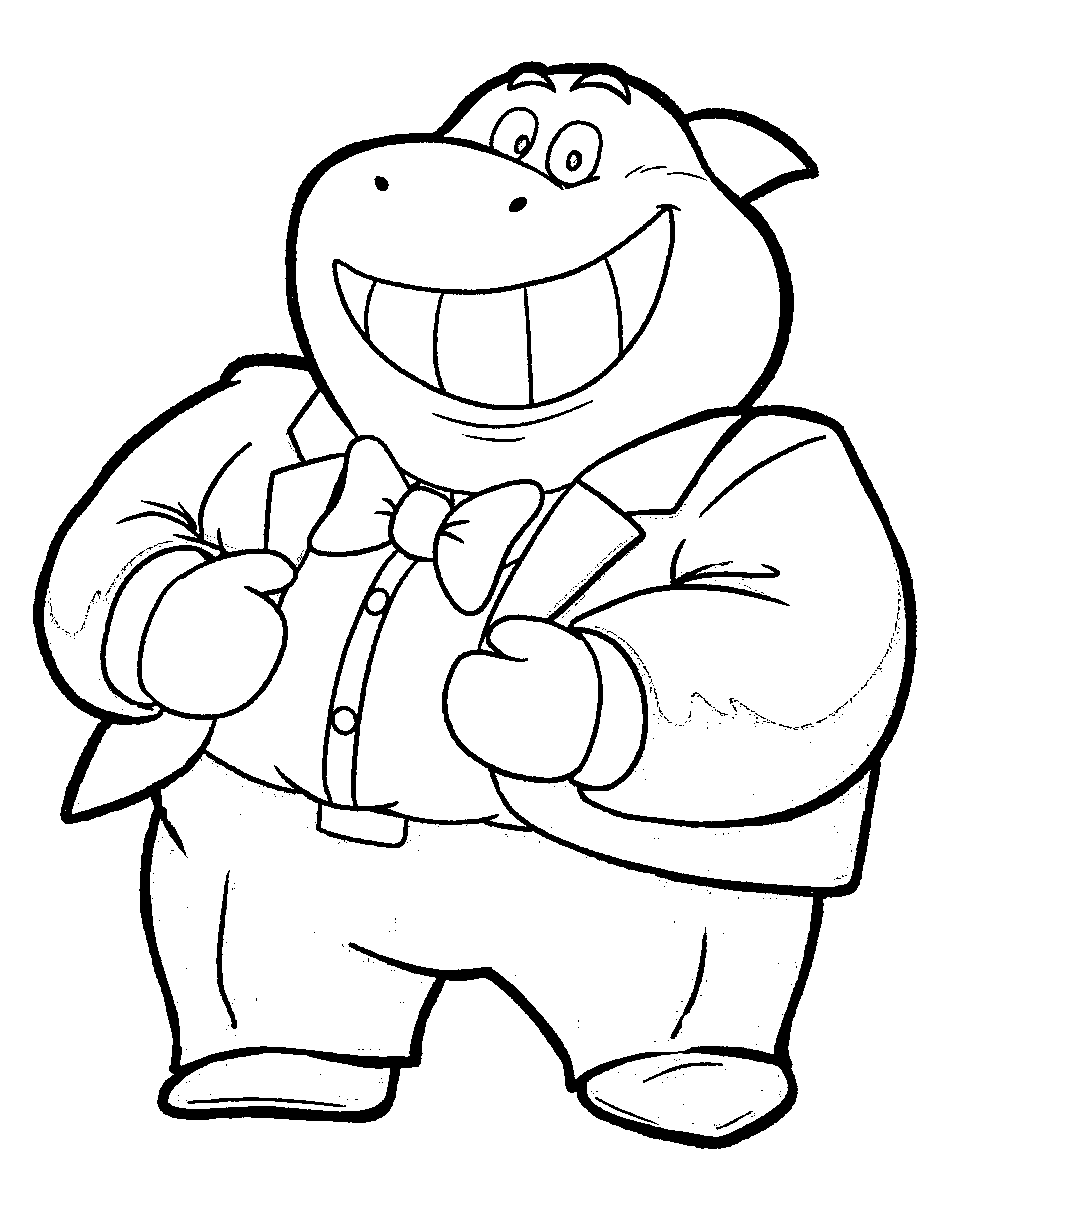 Mr. Snake – The Bad Guys Coloring Pages